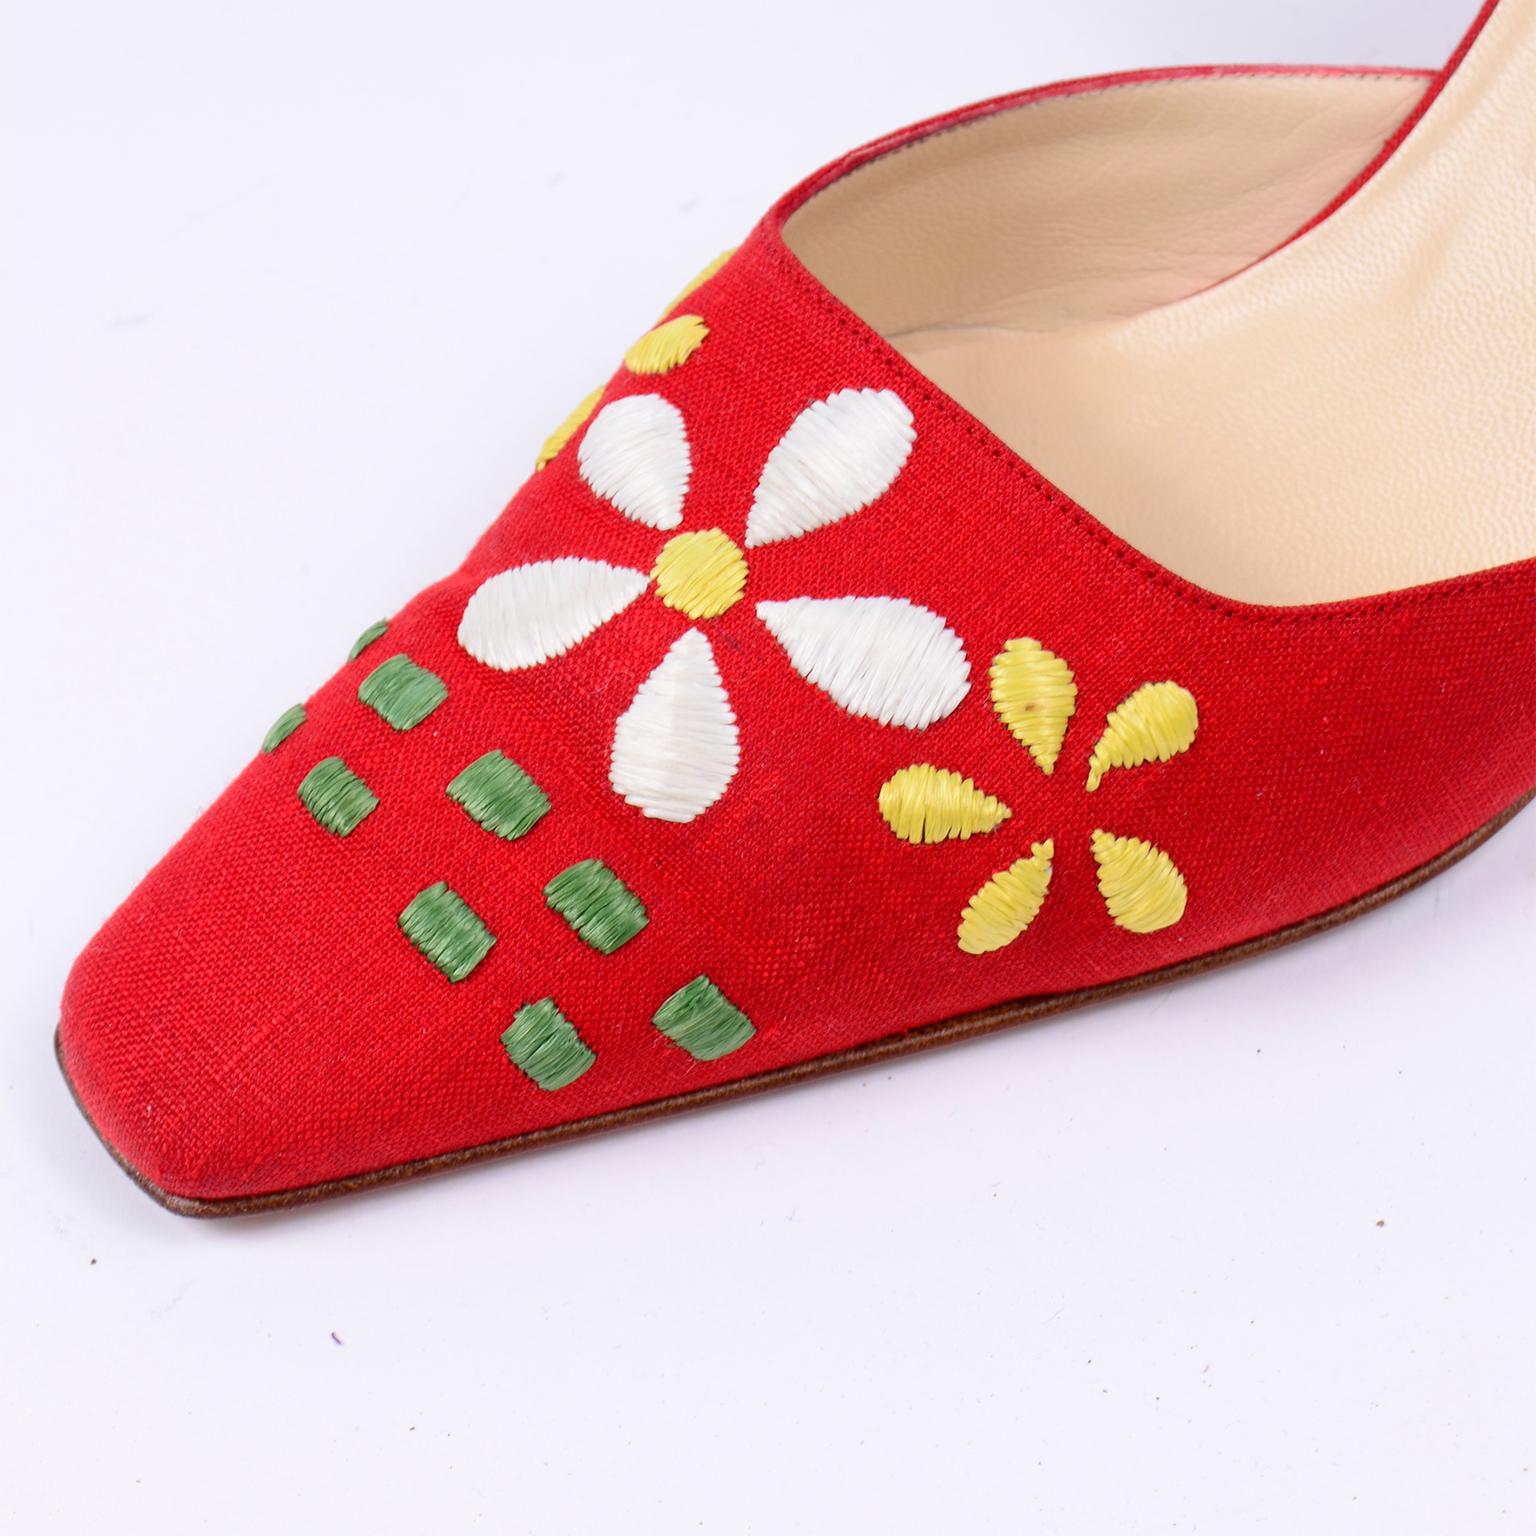 Red Linen Jimmy Choo Slingback Heel Shoes With Daisy Flowers 3